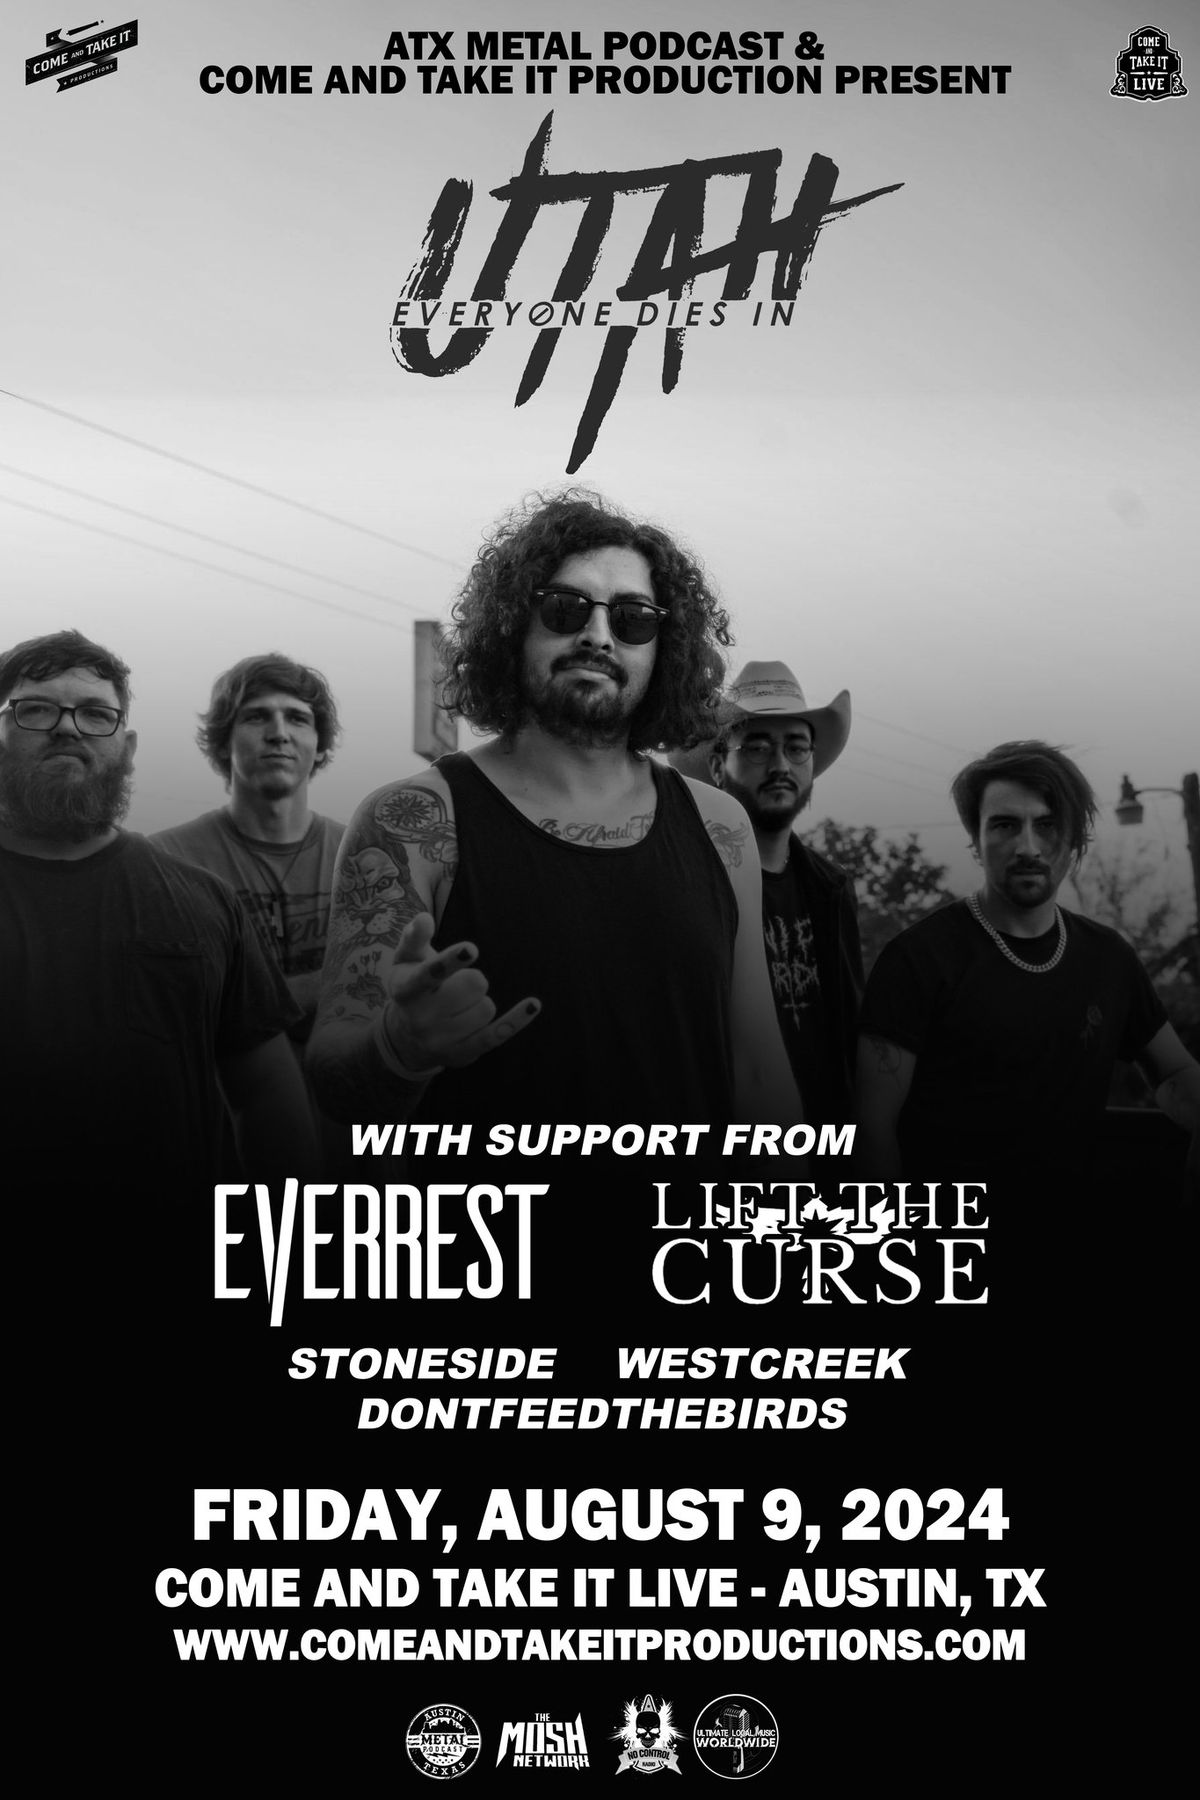 Everyone Dies In Utah, Everrest, Lift the Curse, Stoneside and more at Come and Take It Live!